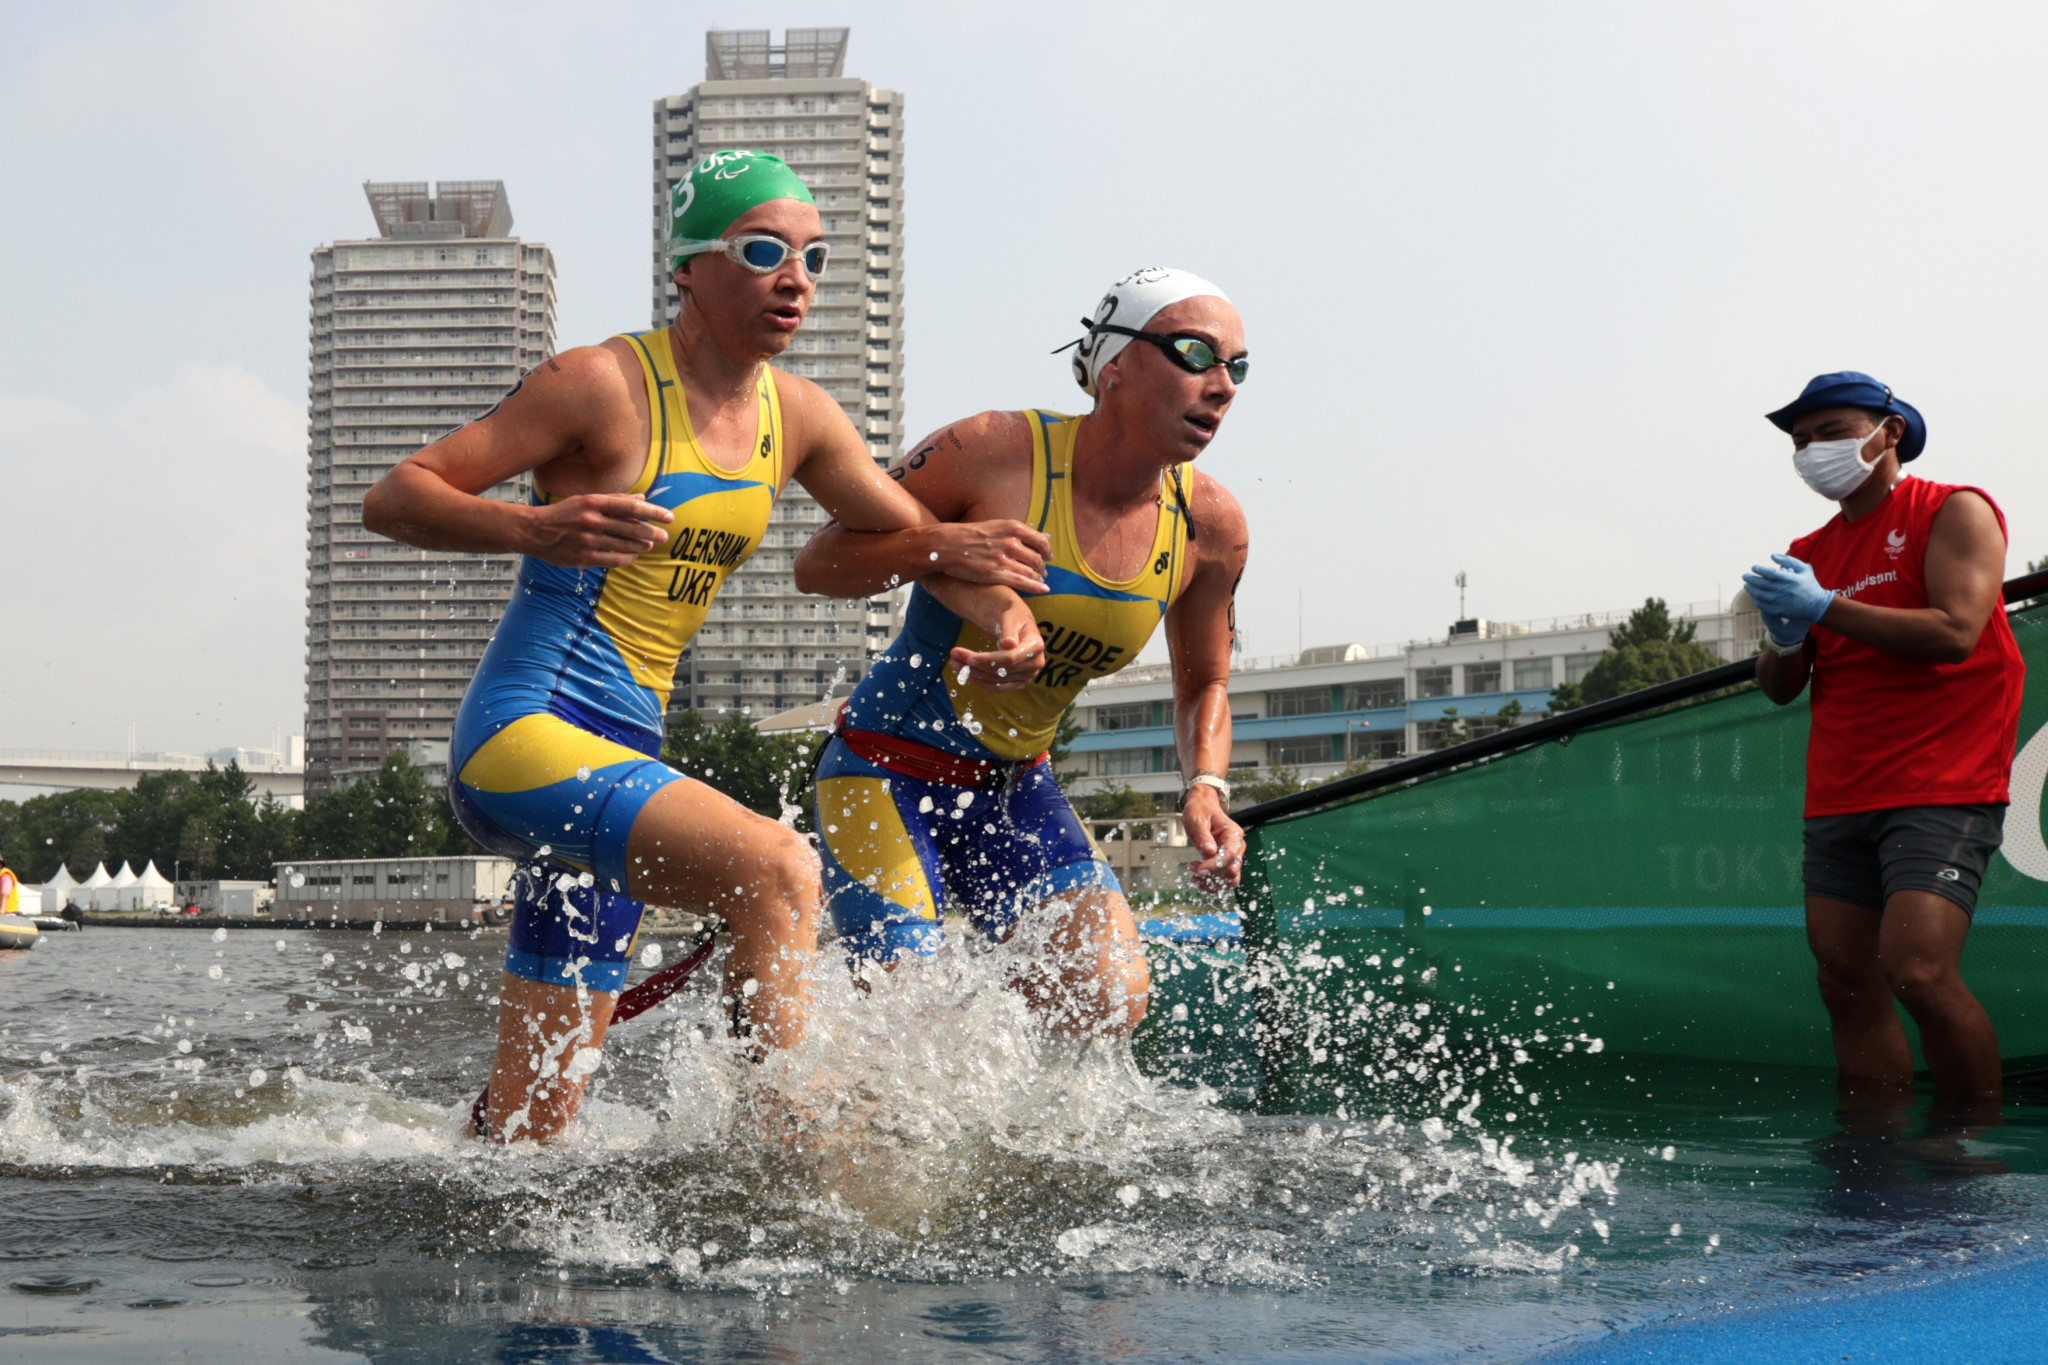 Ukraine's athletes will receive financial support to compete in World Triathlon events ©Getty Images